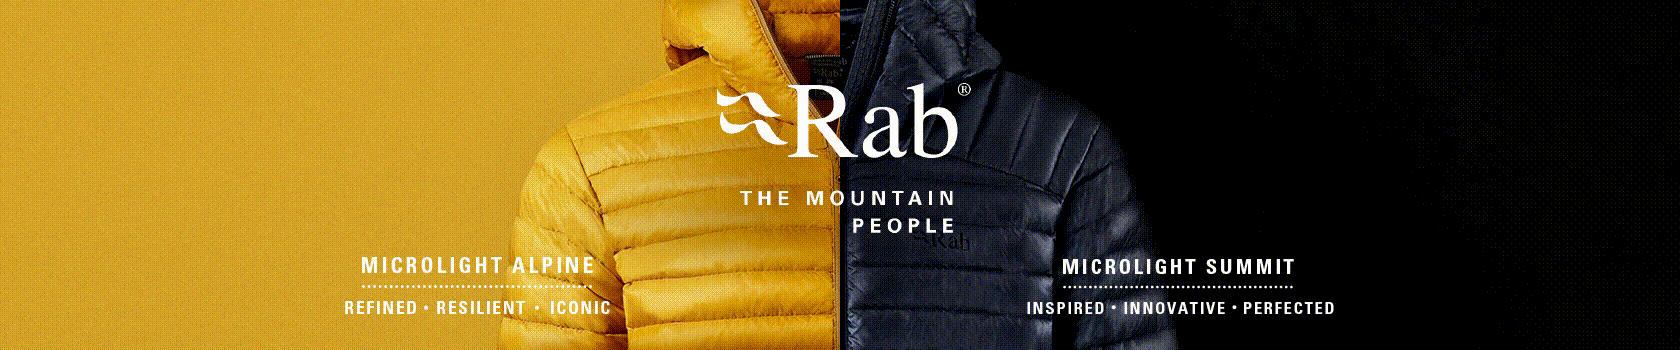 People in the dark using and wearing Rab gear.